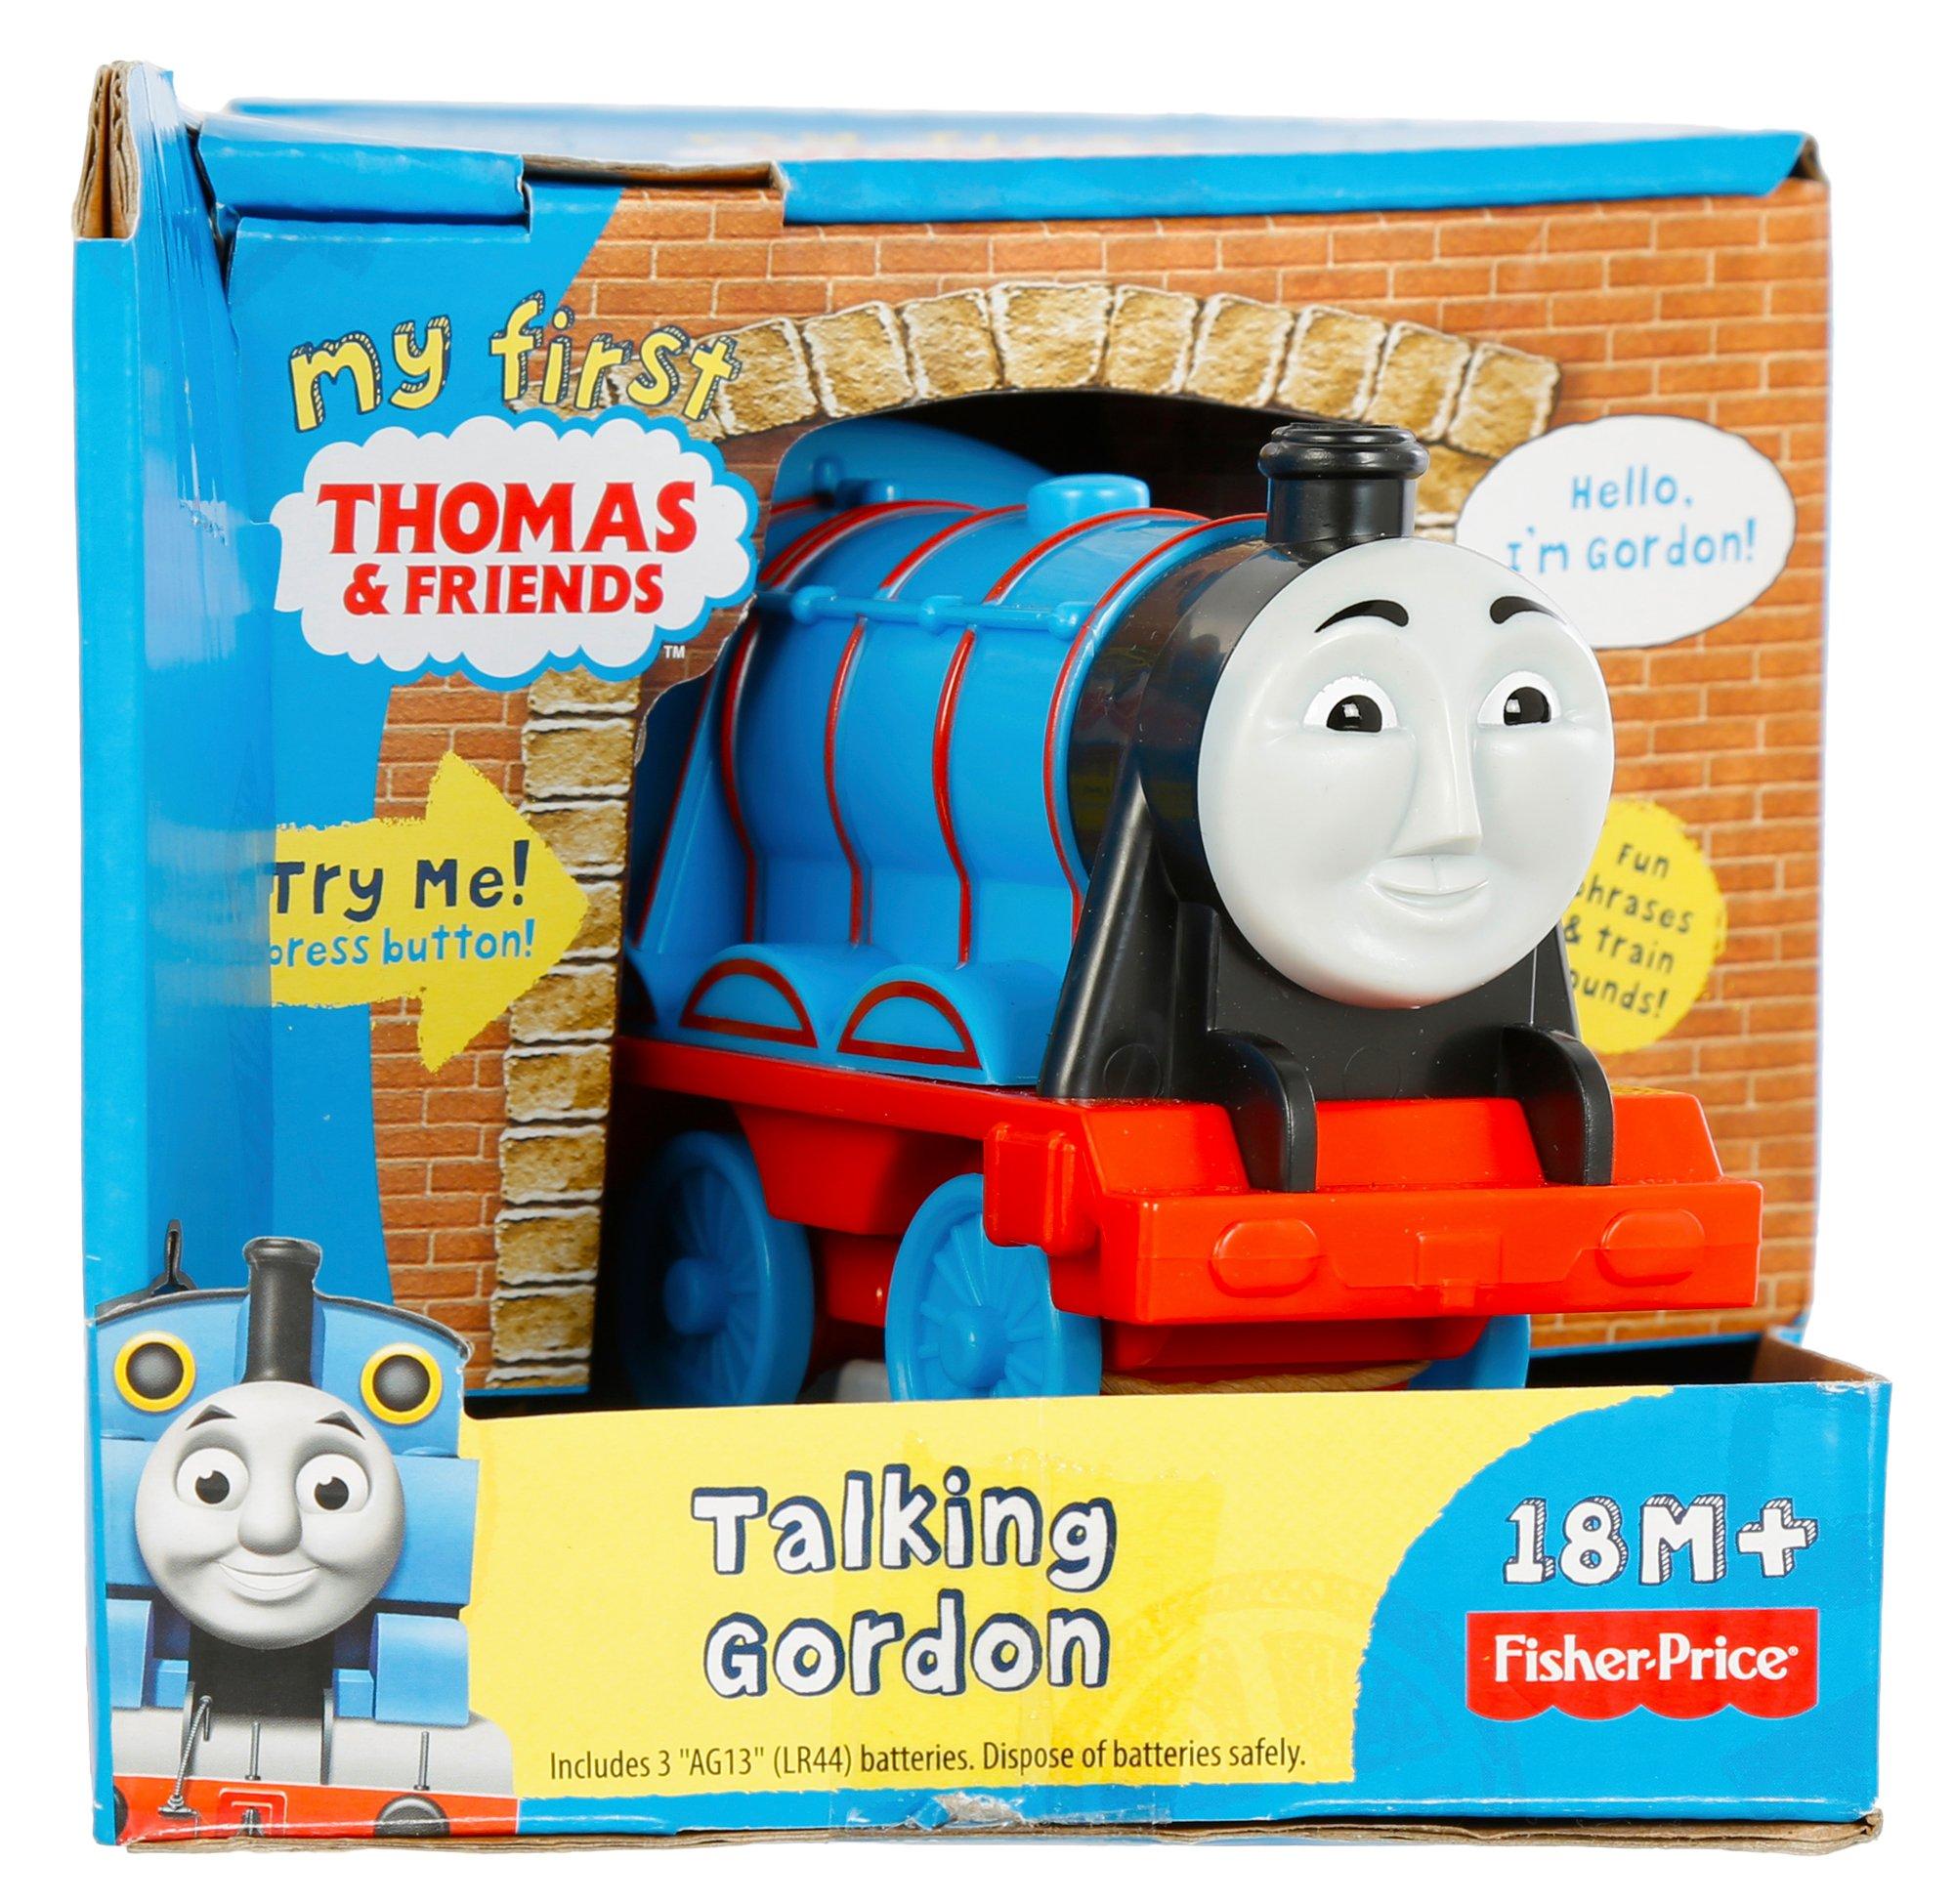 thomas and friends my first thomas